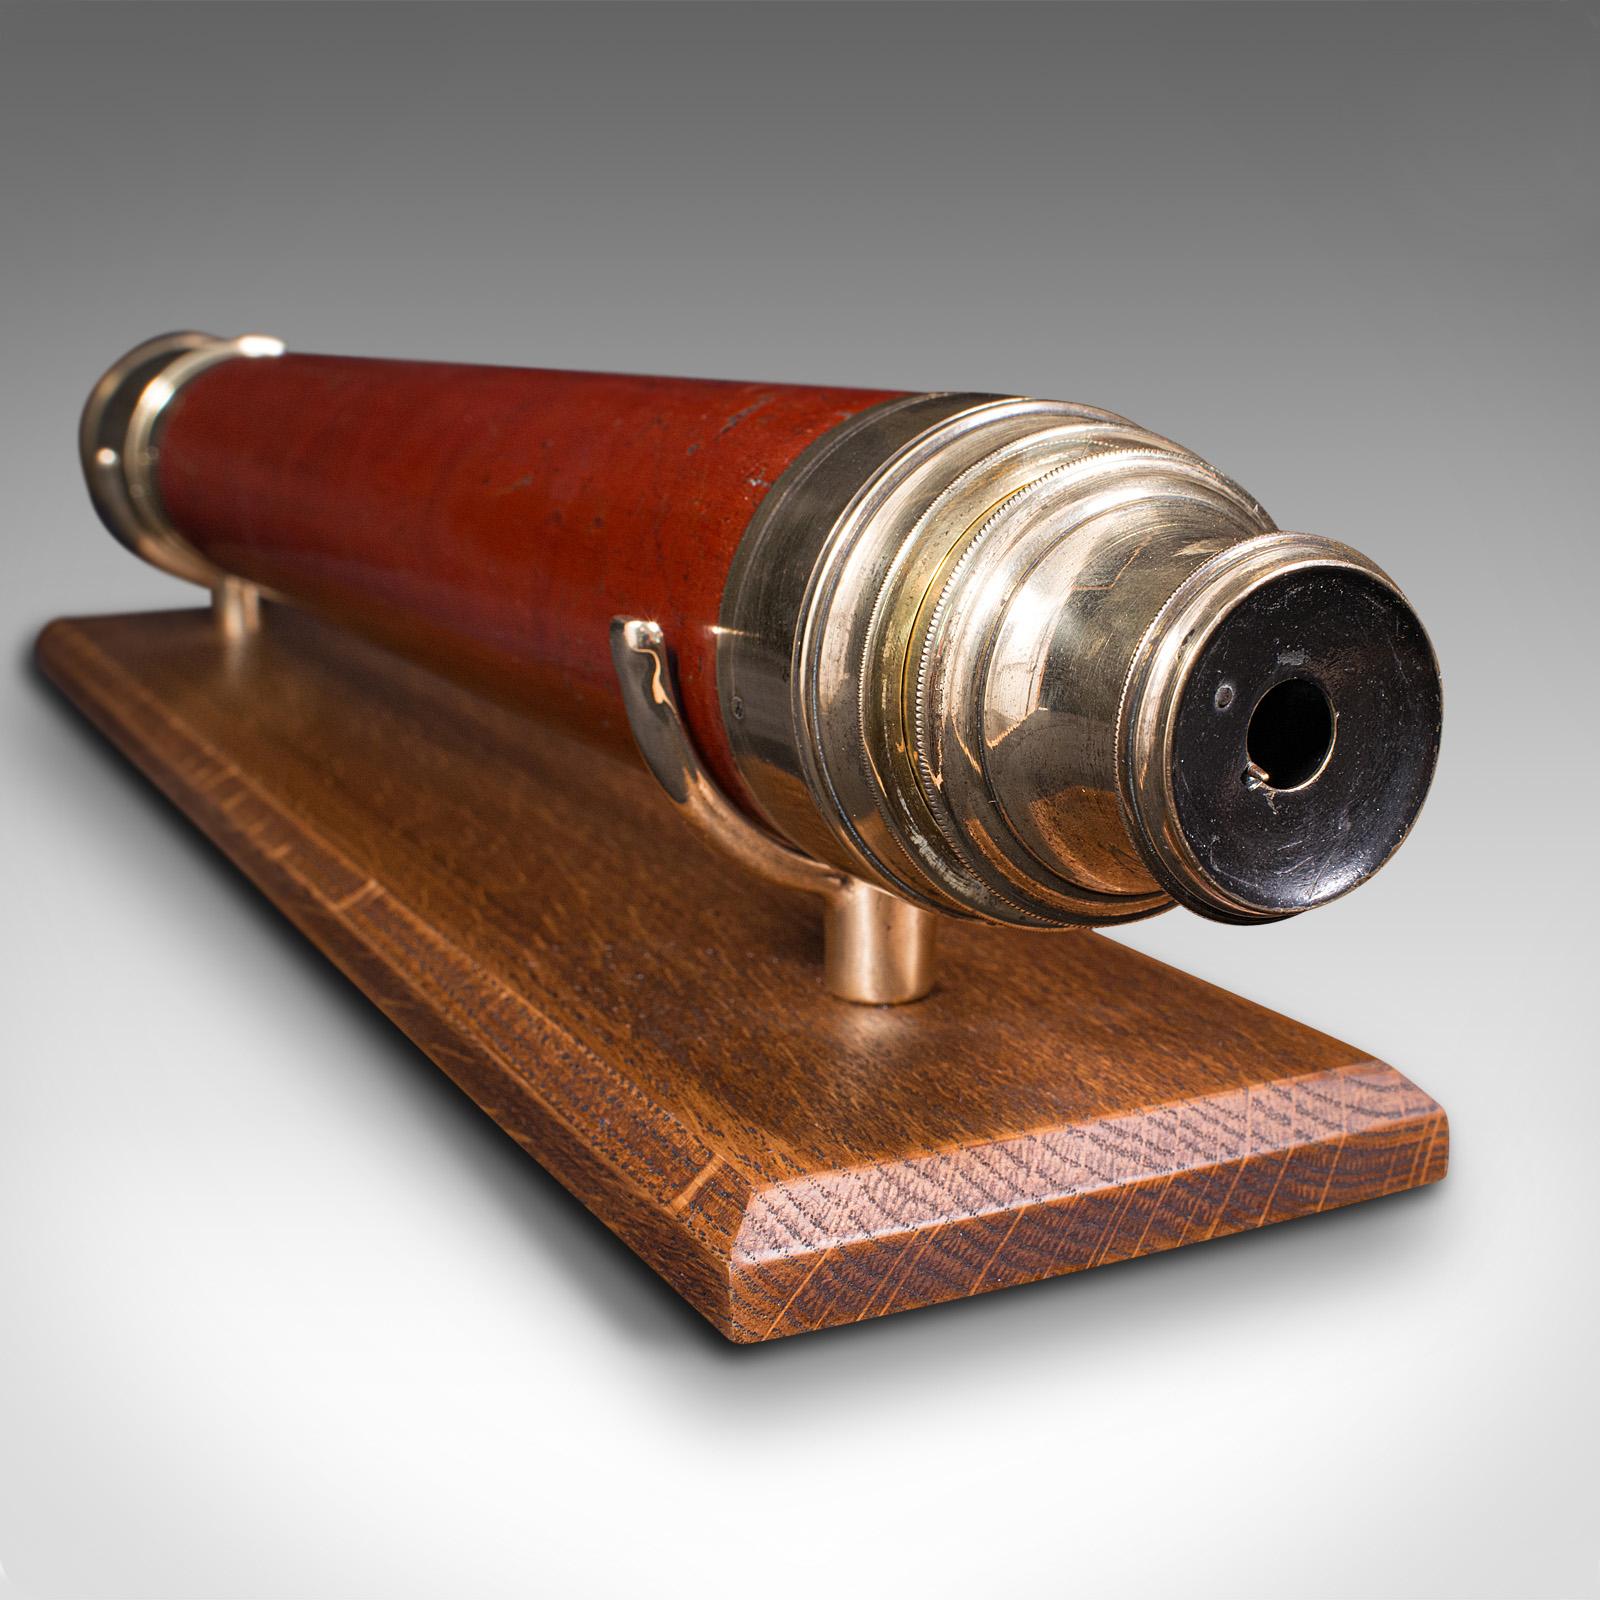 19th Century Large Antique Telescope, English, Single Draw, Astronomical, Dollond, Victorian